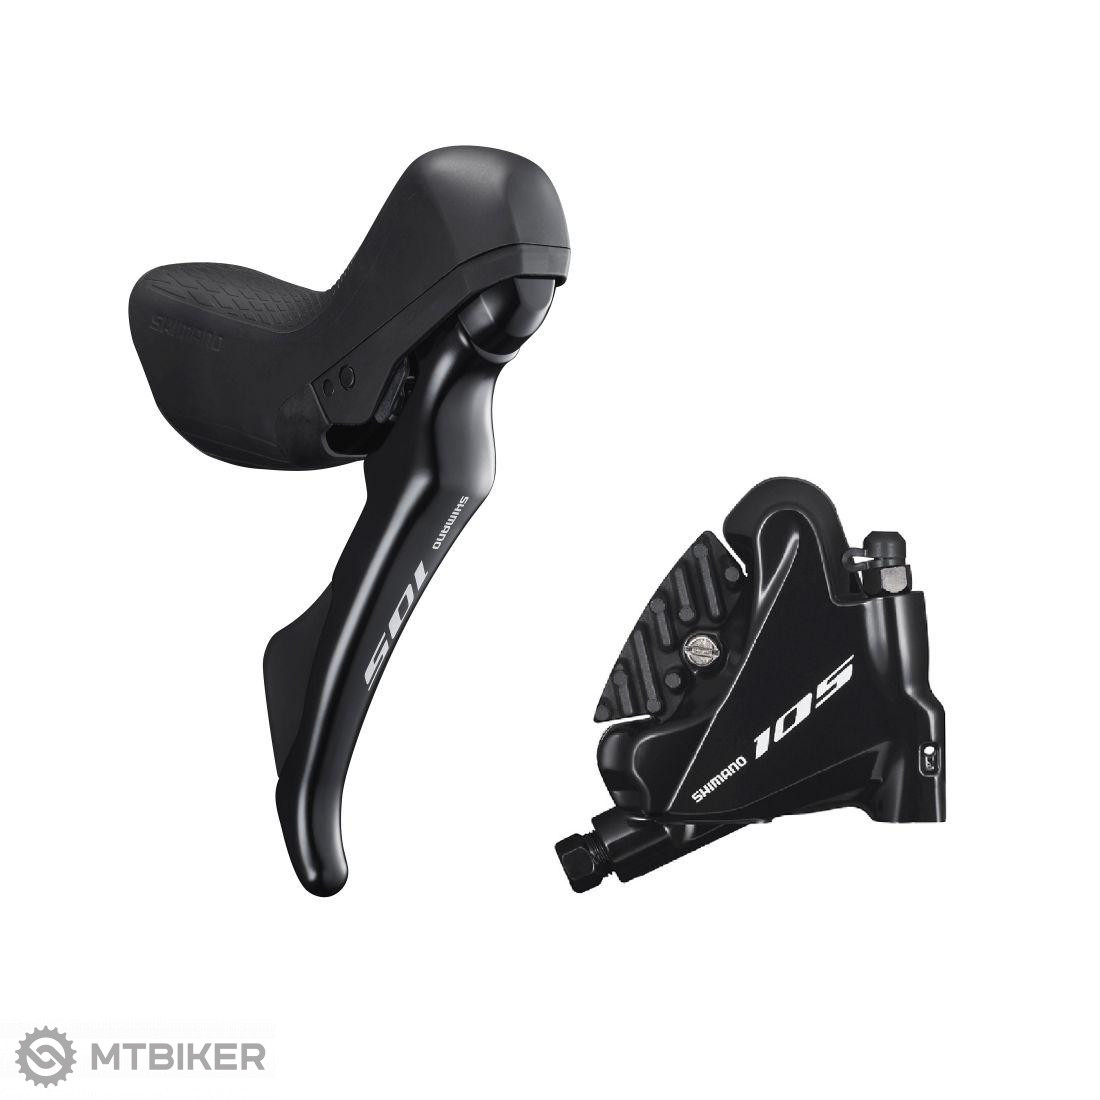 Shimano 105 ST-R7020/BR-R7070 Dual Control right shift lever/hydr